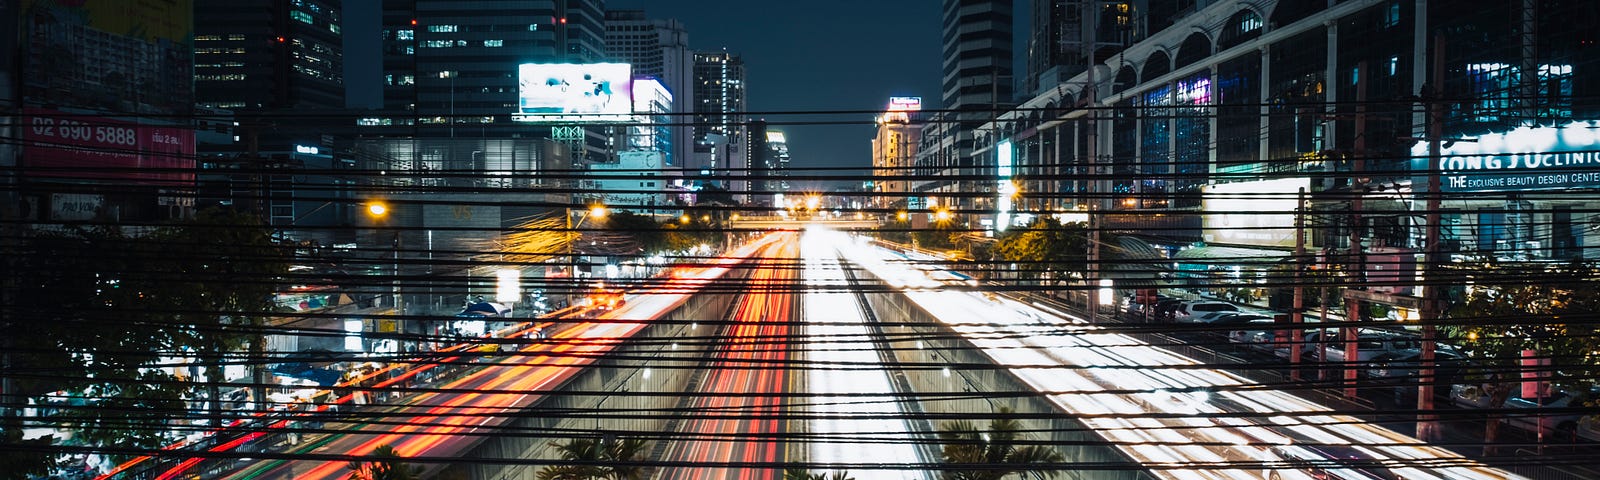 A city picture where the traffic is blurred into streaks of light due to speed.